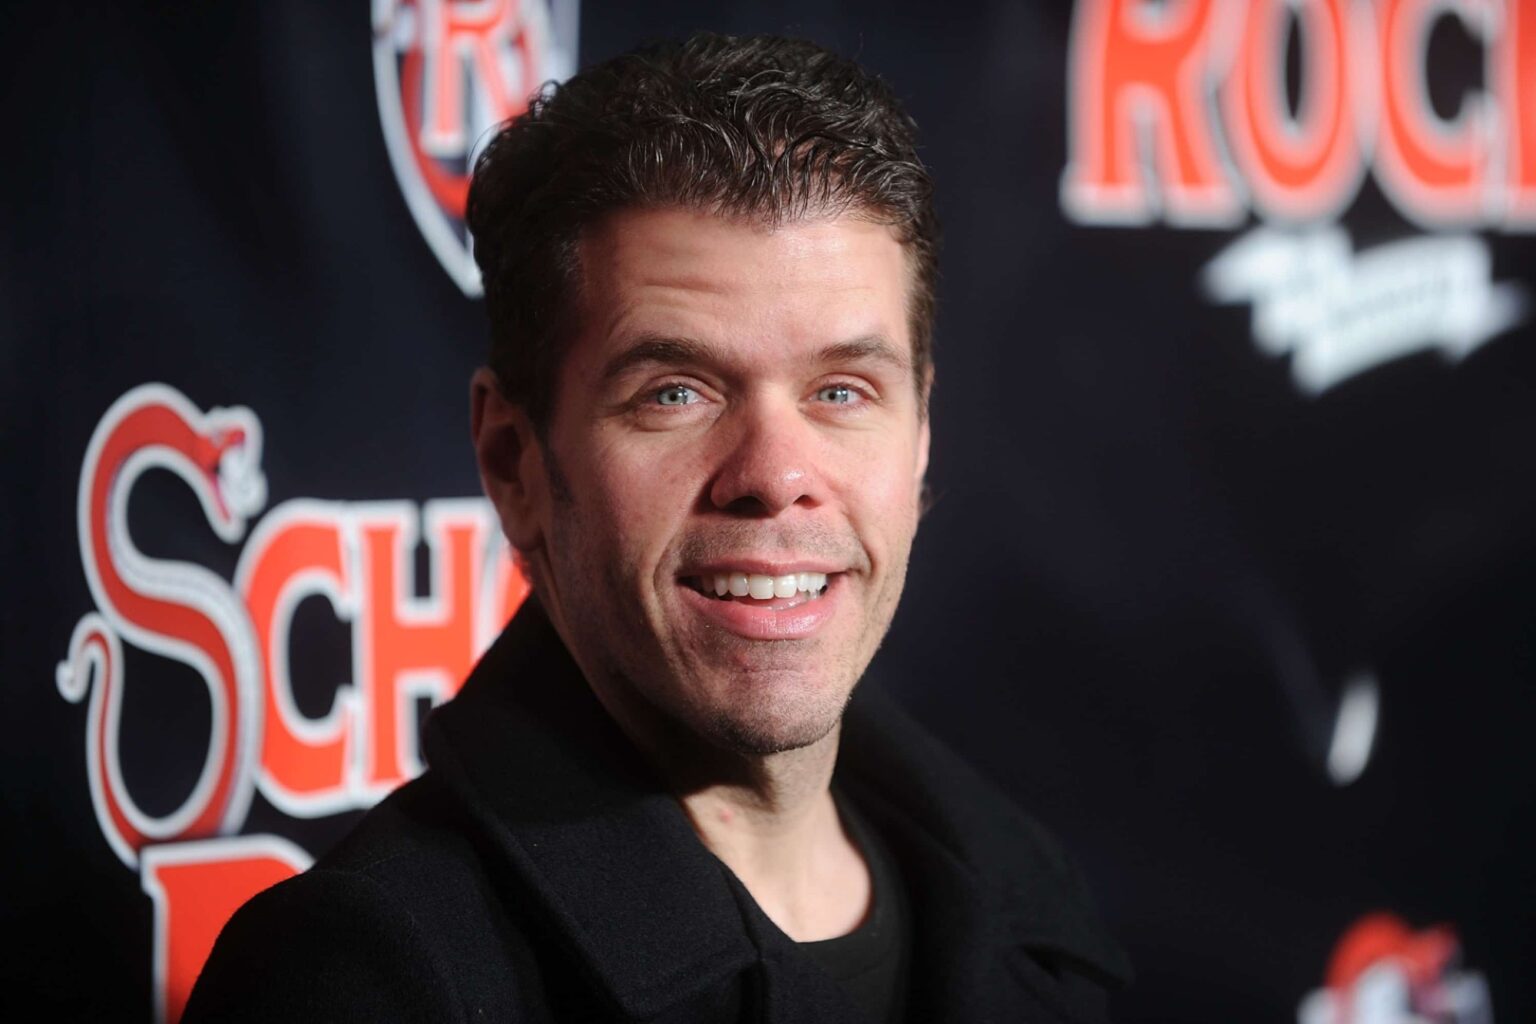 Perez Hilton published a memoir titled ‘TMI’. Is the tell-all book going to boost the blogger’s net worth?